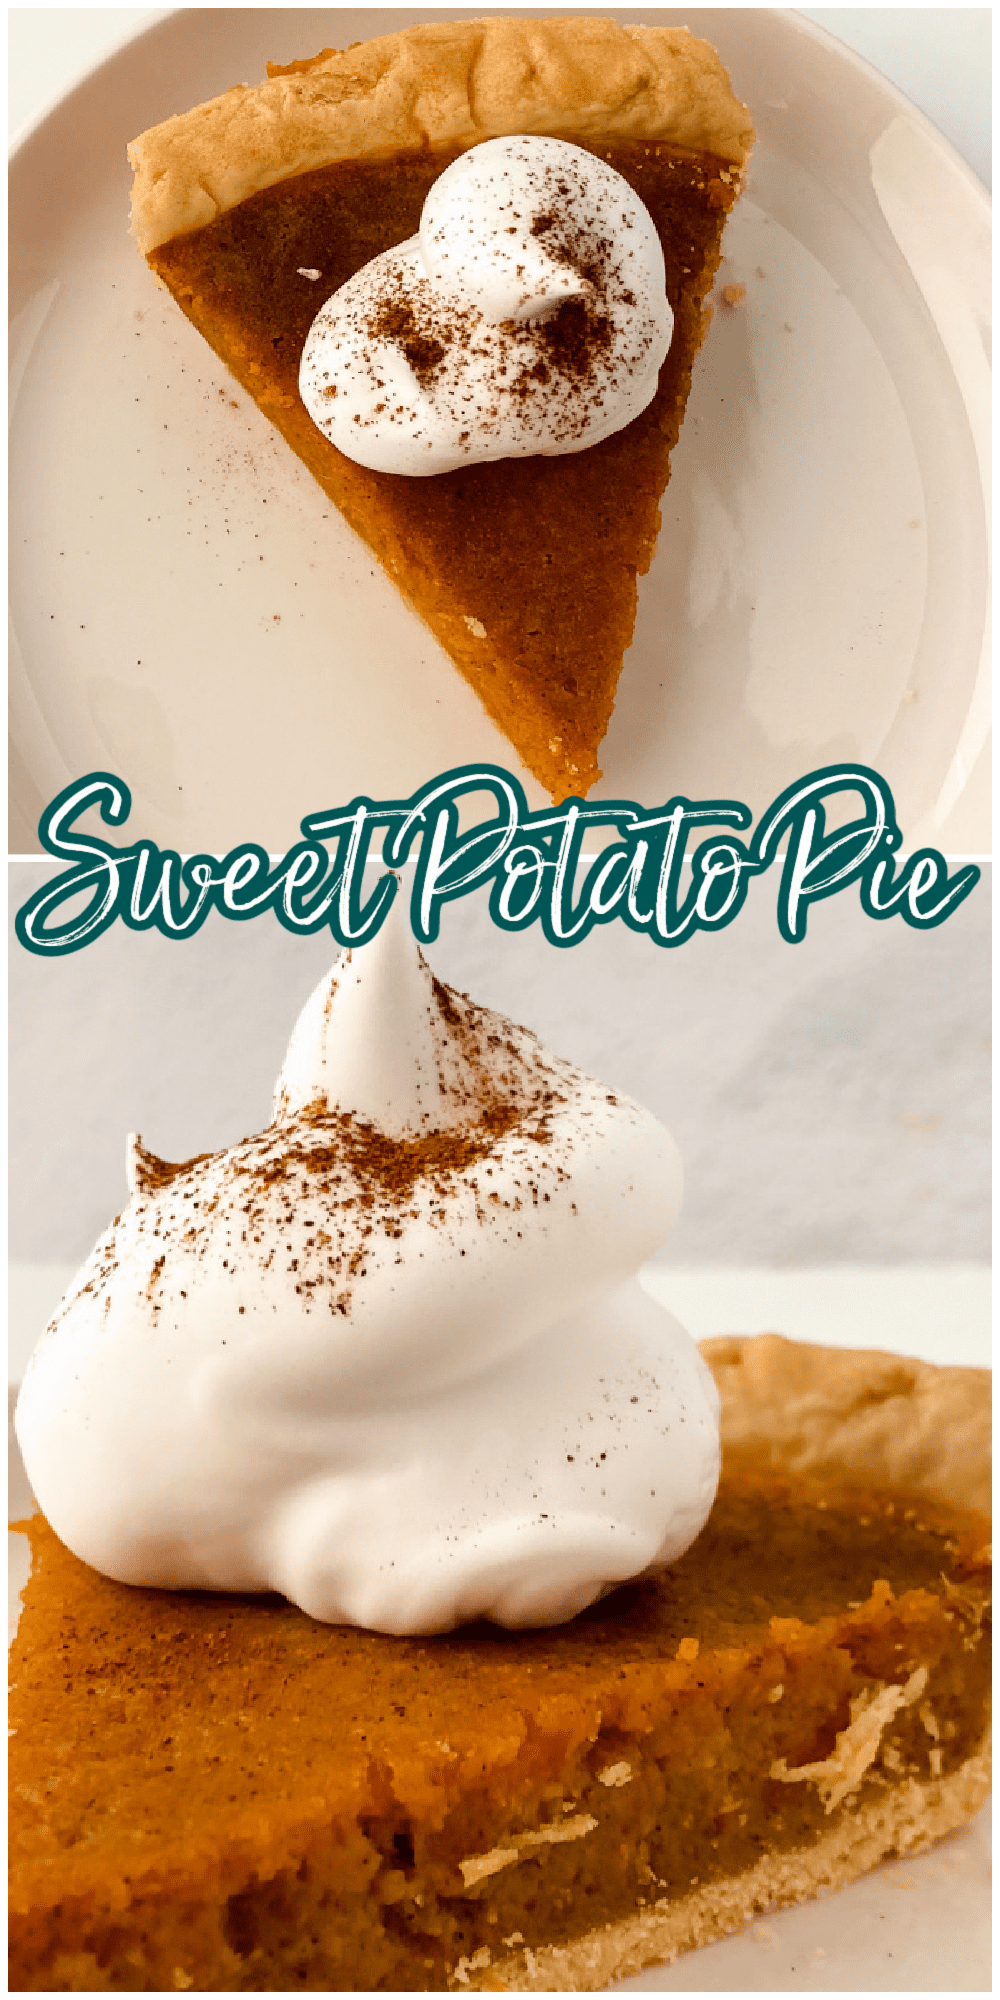 Homemade Sweet Potato Pie is a mouth-watering alternative to classic pumpkin pie, undoubtedly deserving a spot on your holiday table this year! Serve it warm or chilled with whipped cream or ice cream and let those compliments roll on in! via @jugglingactmama